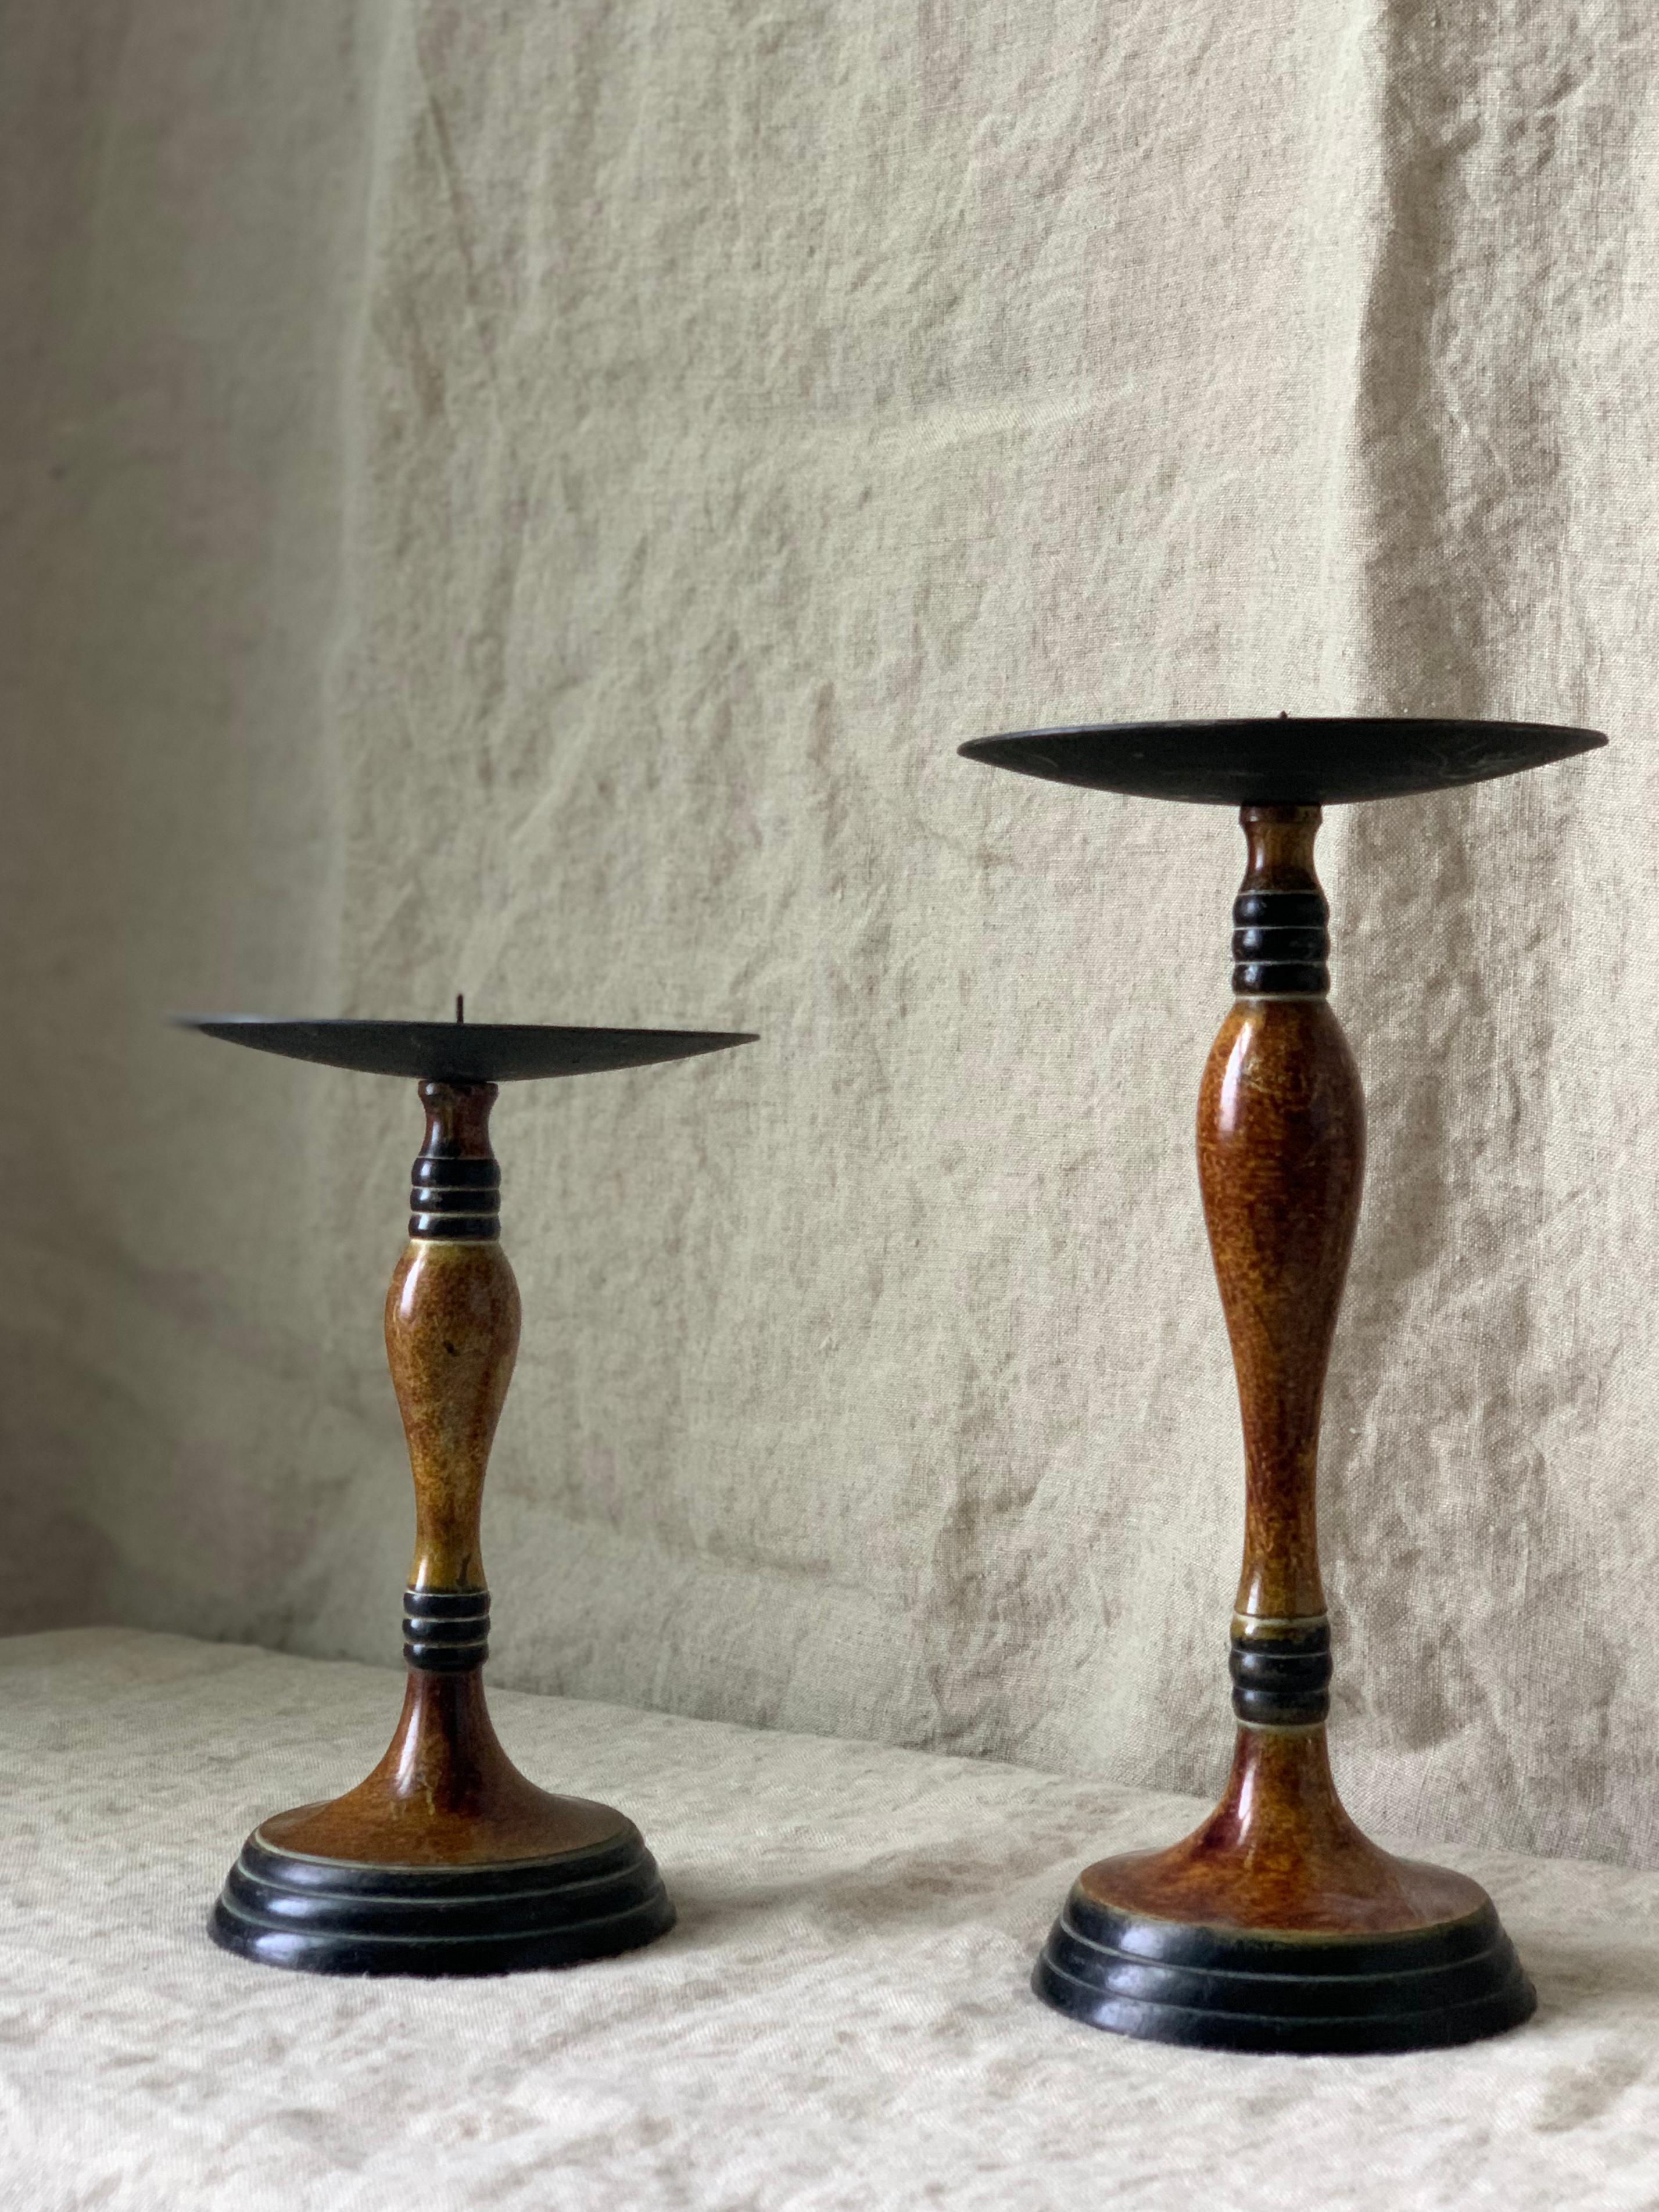 NEOCLASSICAL candle sticks

HEIGHT
 8